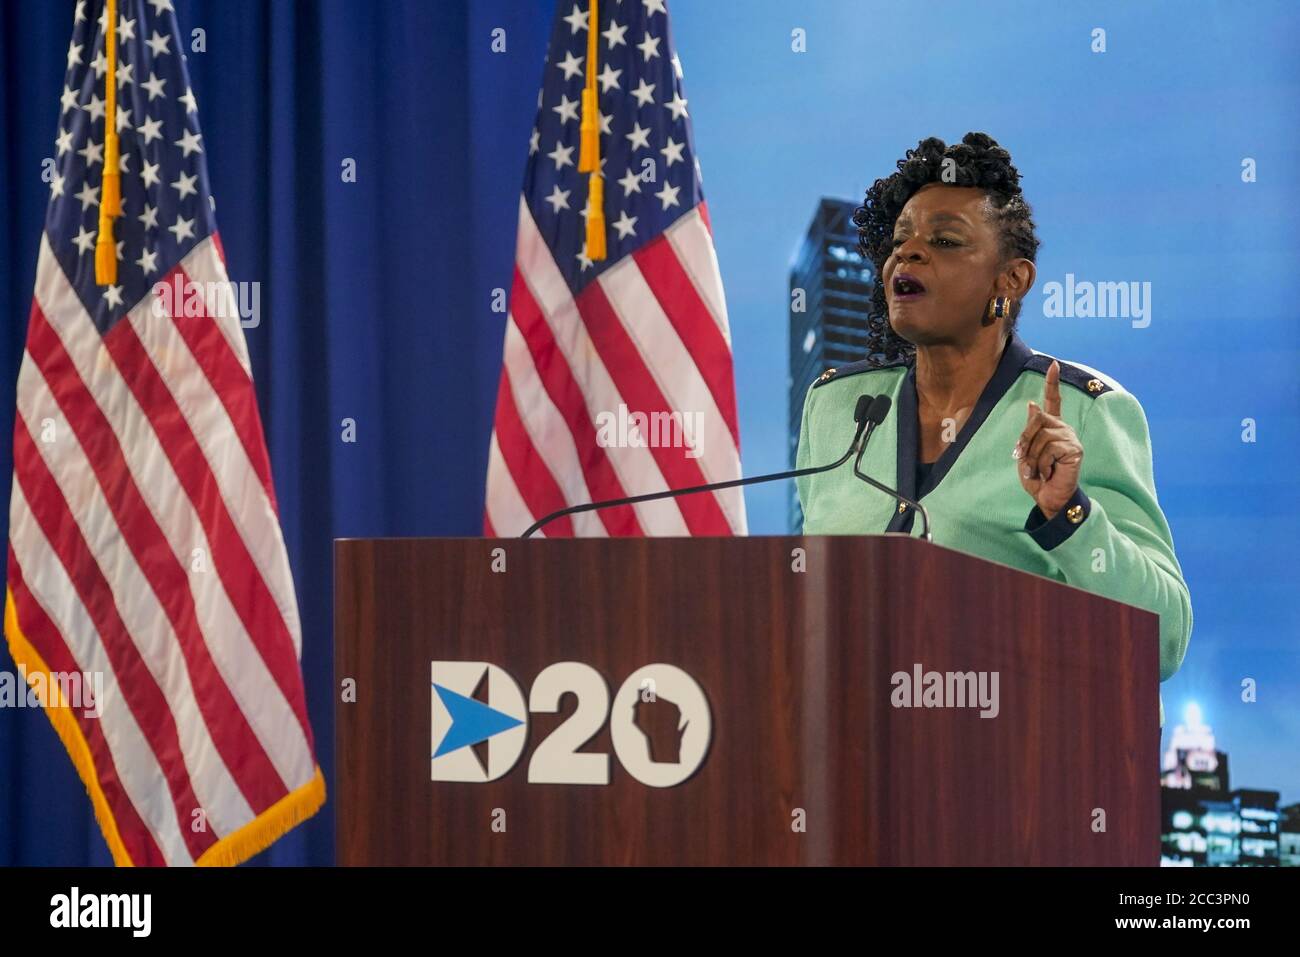 Milwaukee, United States. 17th Aug, 2020. Rep. Gwen Moore, D-Wisc., speaks at the Democratic National Convention Monday, August 17, 2020, in Milwaukee. The convention, mostly online, kicked off with an emphasis on the coronavirus pandemic, the ongoing economic downturn caused by the virus and the national reckoning over racial injustice. Pool photo by Morry Gash/UPI Credit: UPI/Alamy Live News Stock Photo